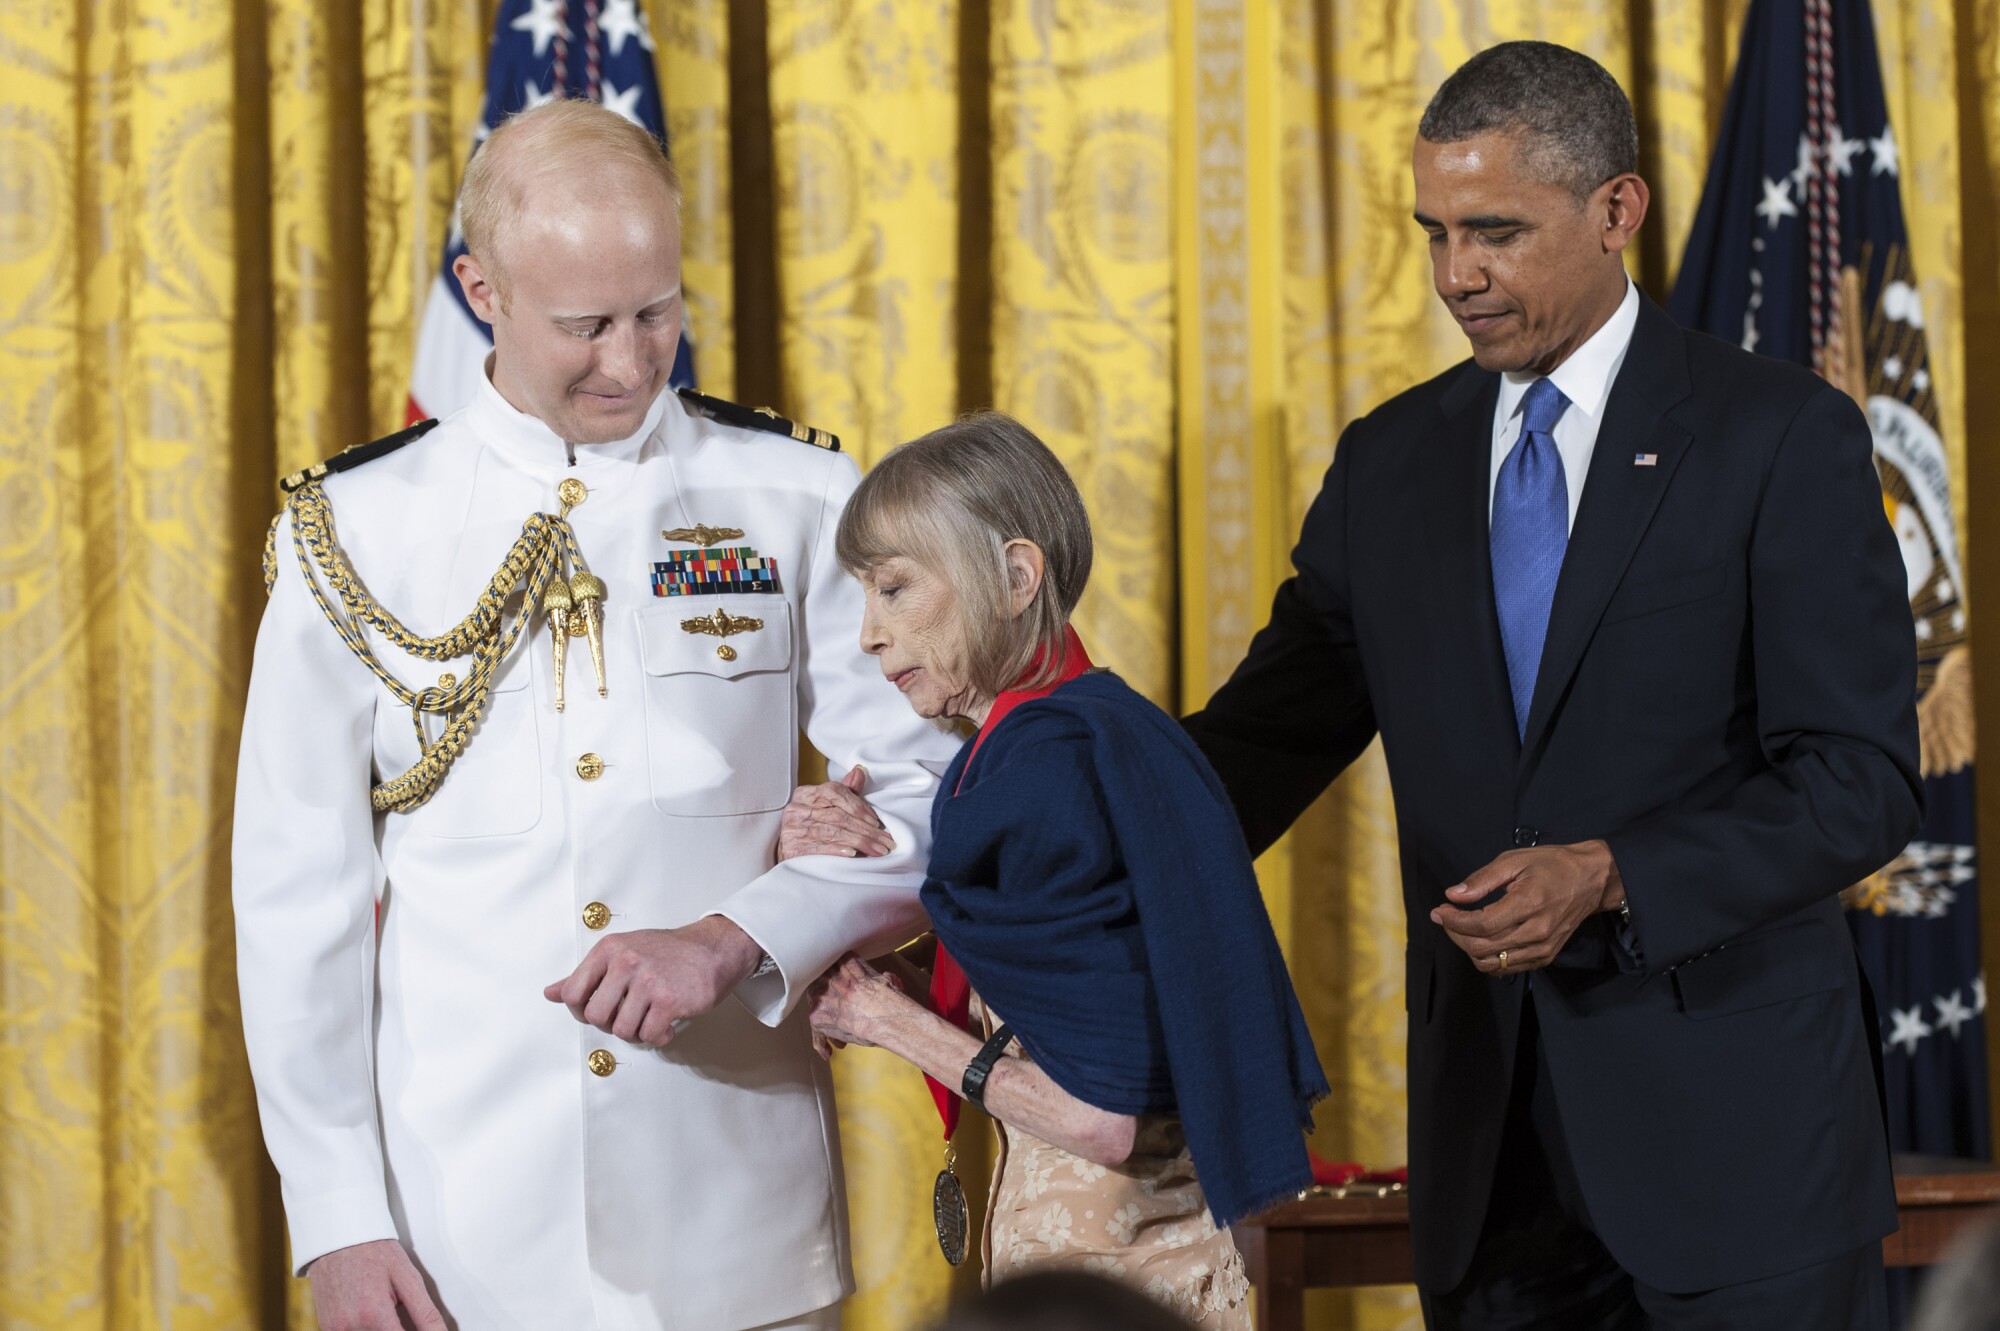 A uniformed official escorts Joan Didion as President Obama watches.